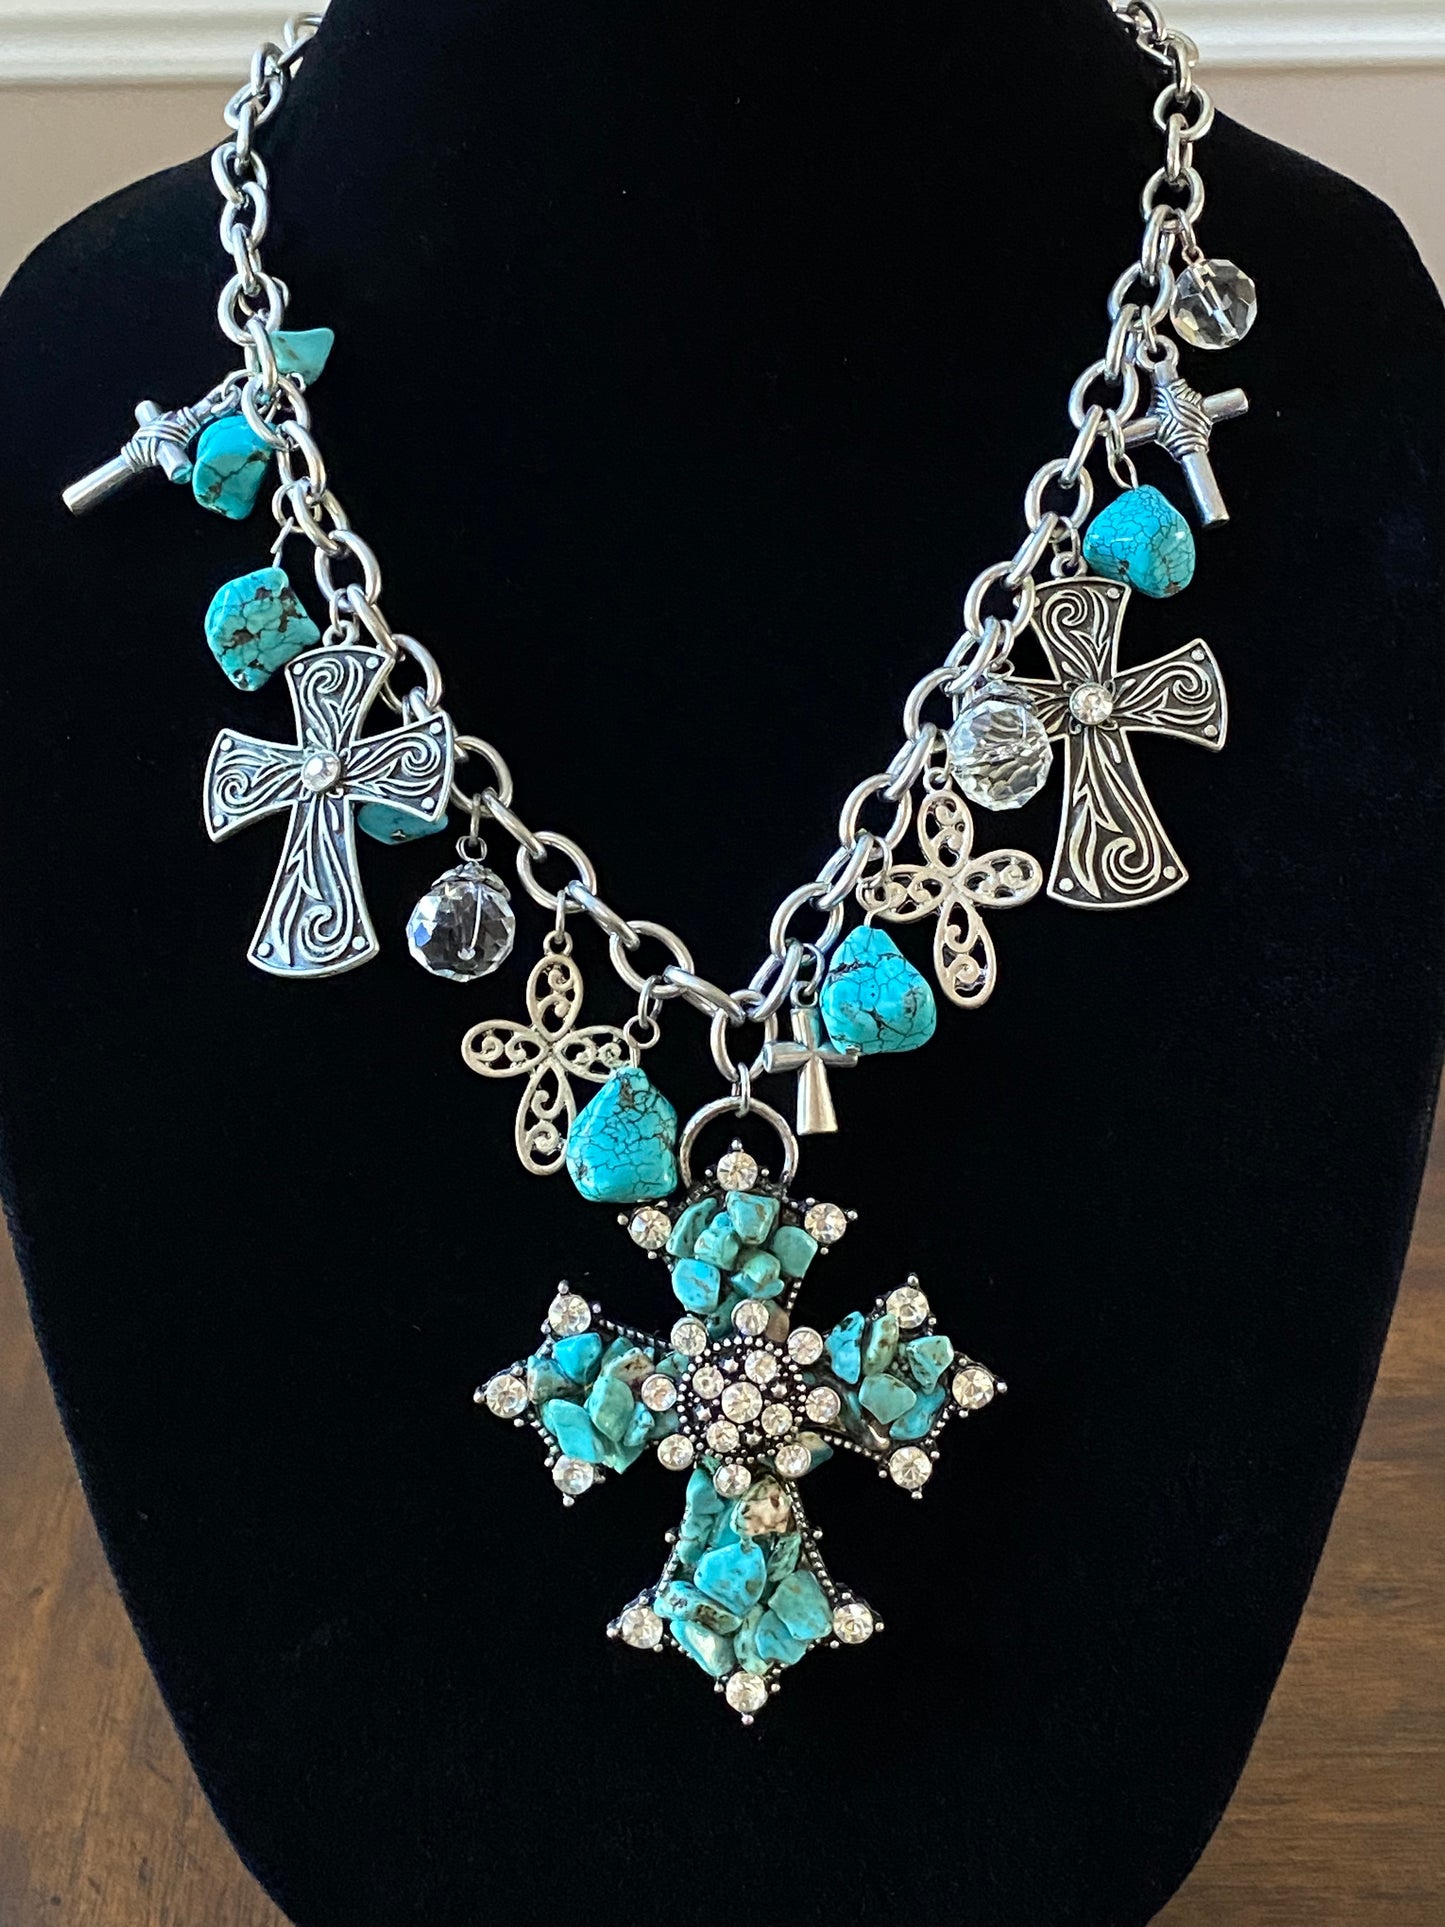 Antique Silver and Turquoise Southwestern Necklace with Cross Pendant